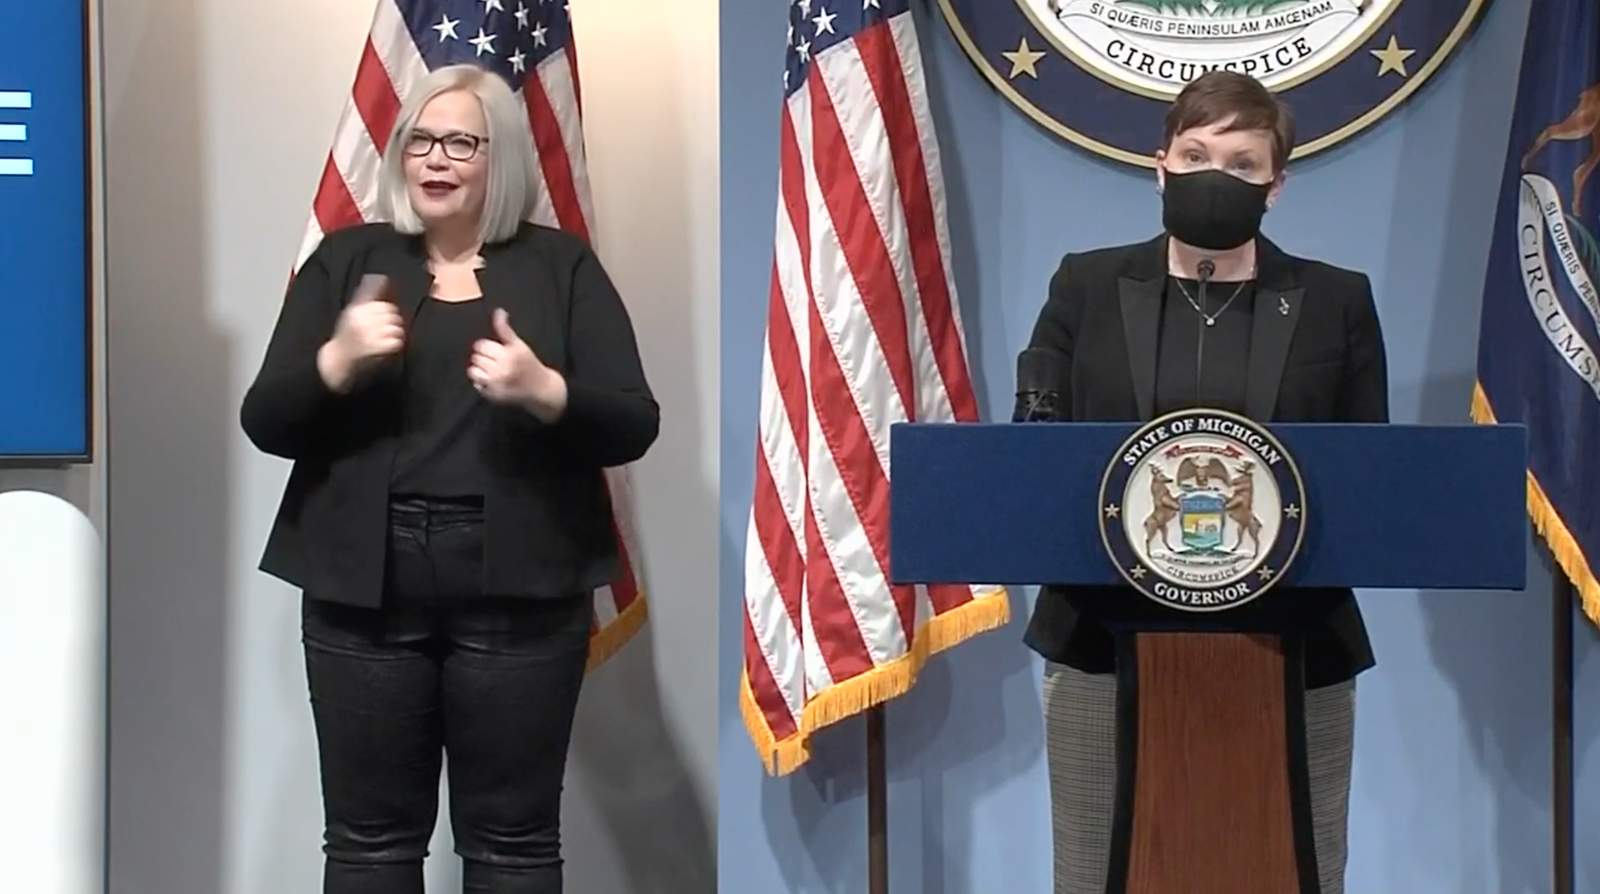 View here: Michigan’s March 2, 2021 COVID ‘Gatherings and Face Mask Order’